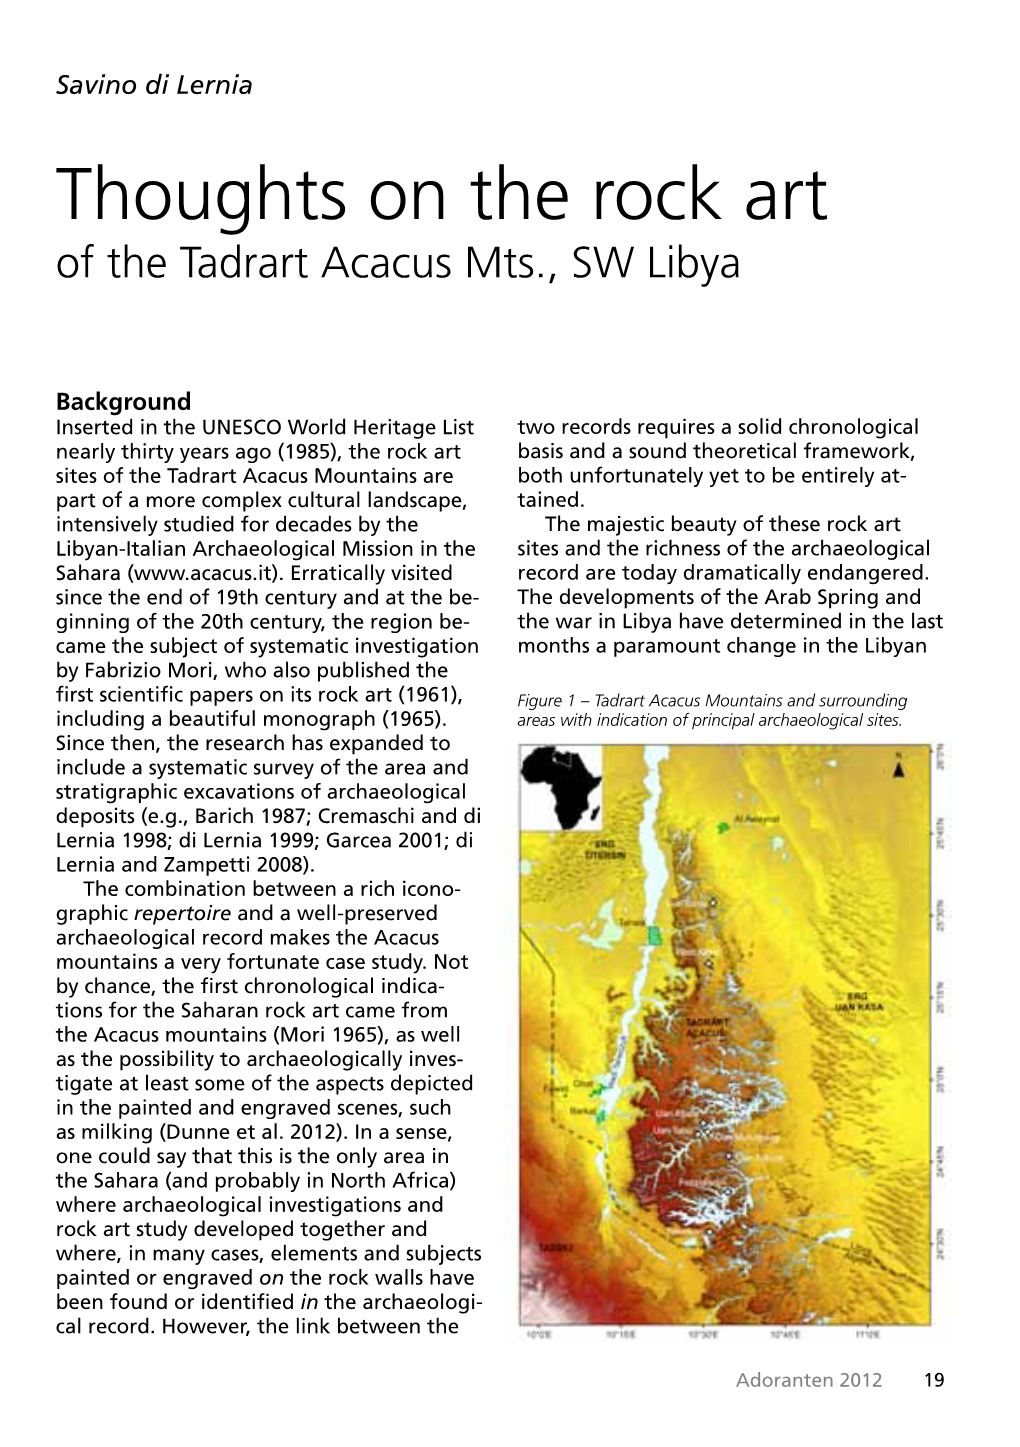 Thoughts on the Rock Art of the Tadrart Acacus Mts., SW Libya